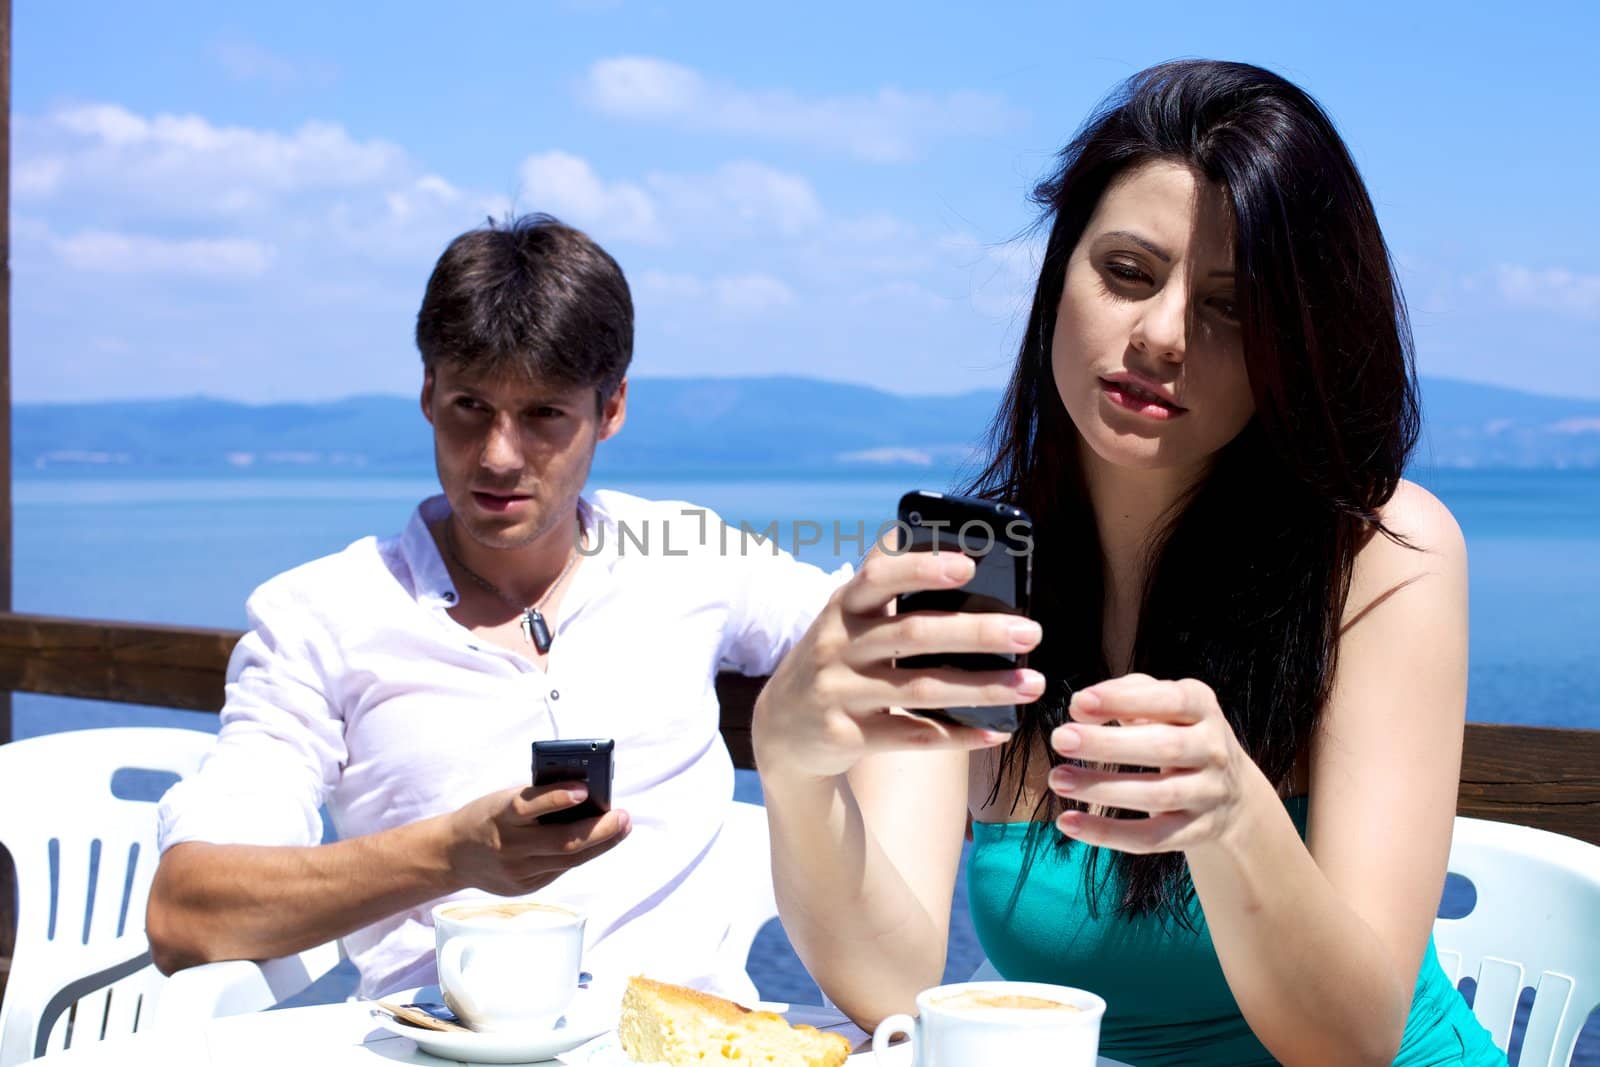 Couple texting with cellphones on a lake